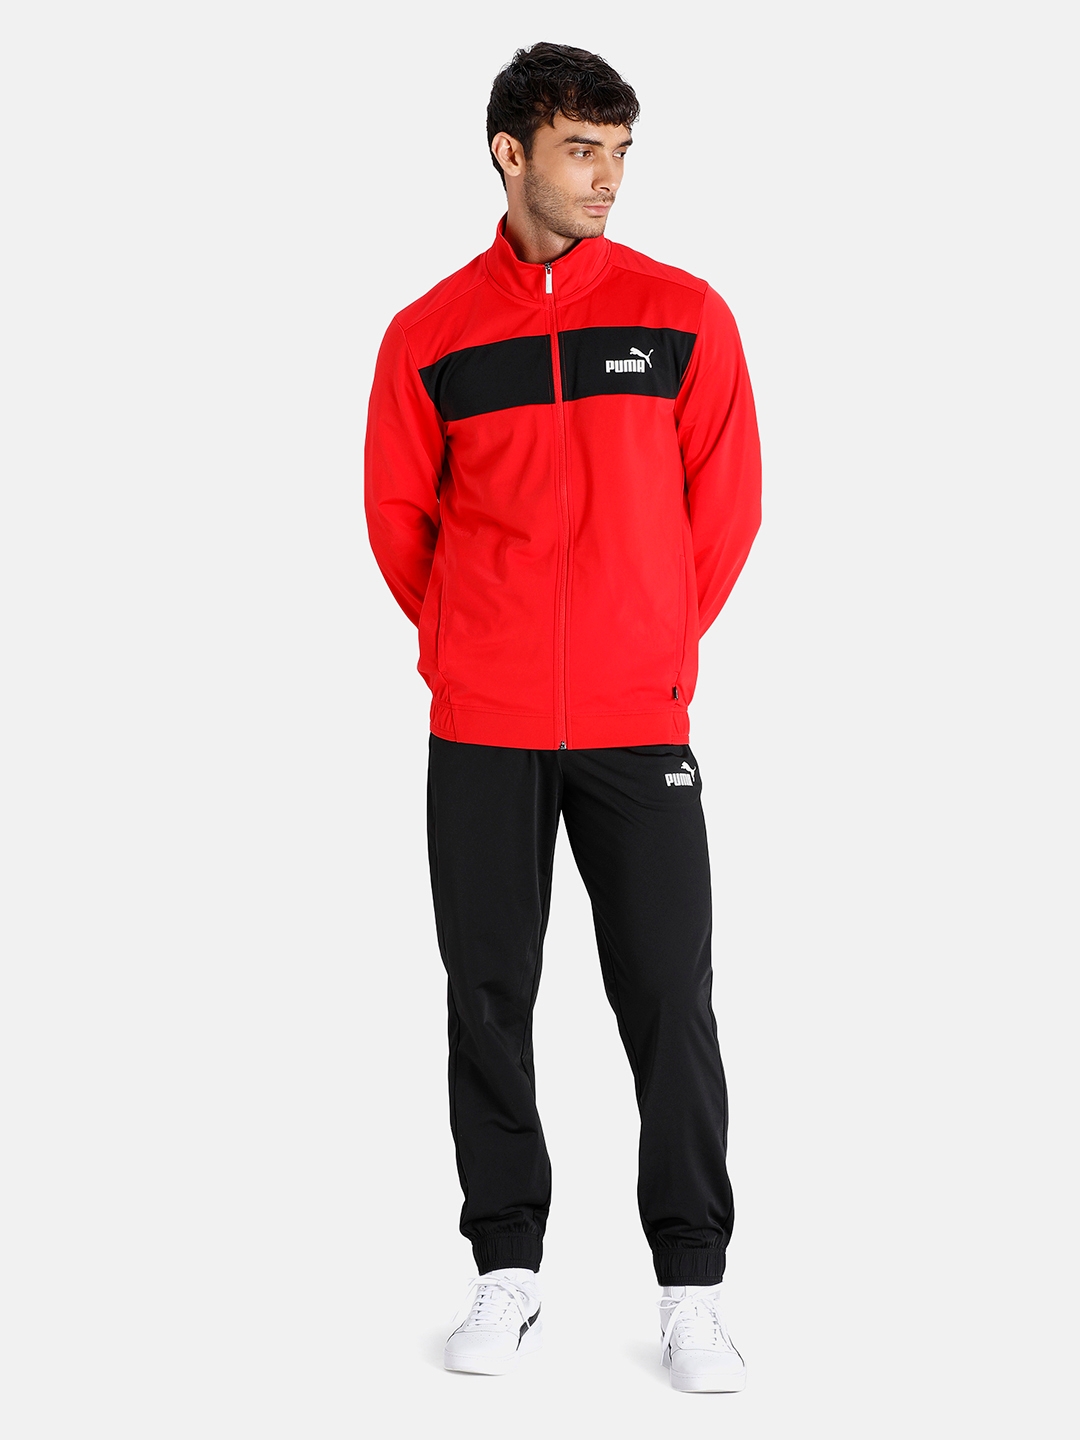 PUMA | PUMA POLY SUIT CL HIGH RISK RED LIFESTYLE TrackSuit